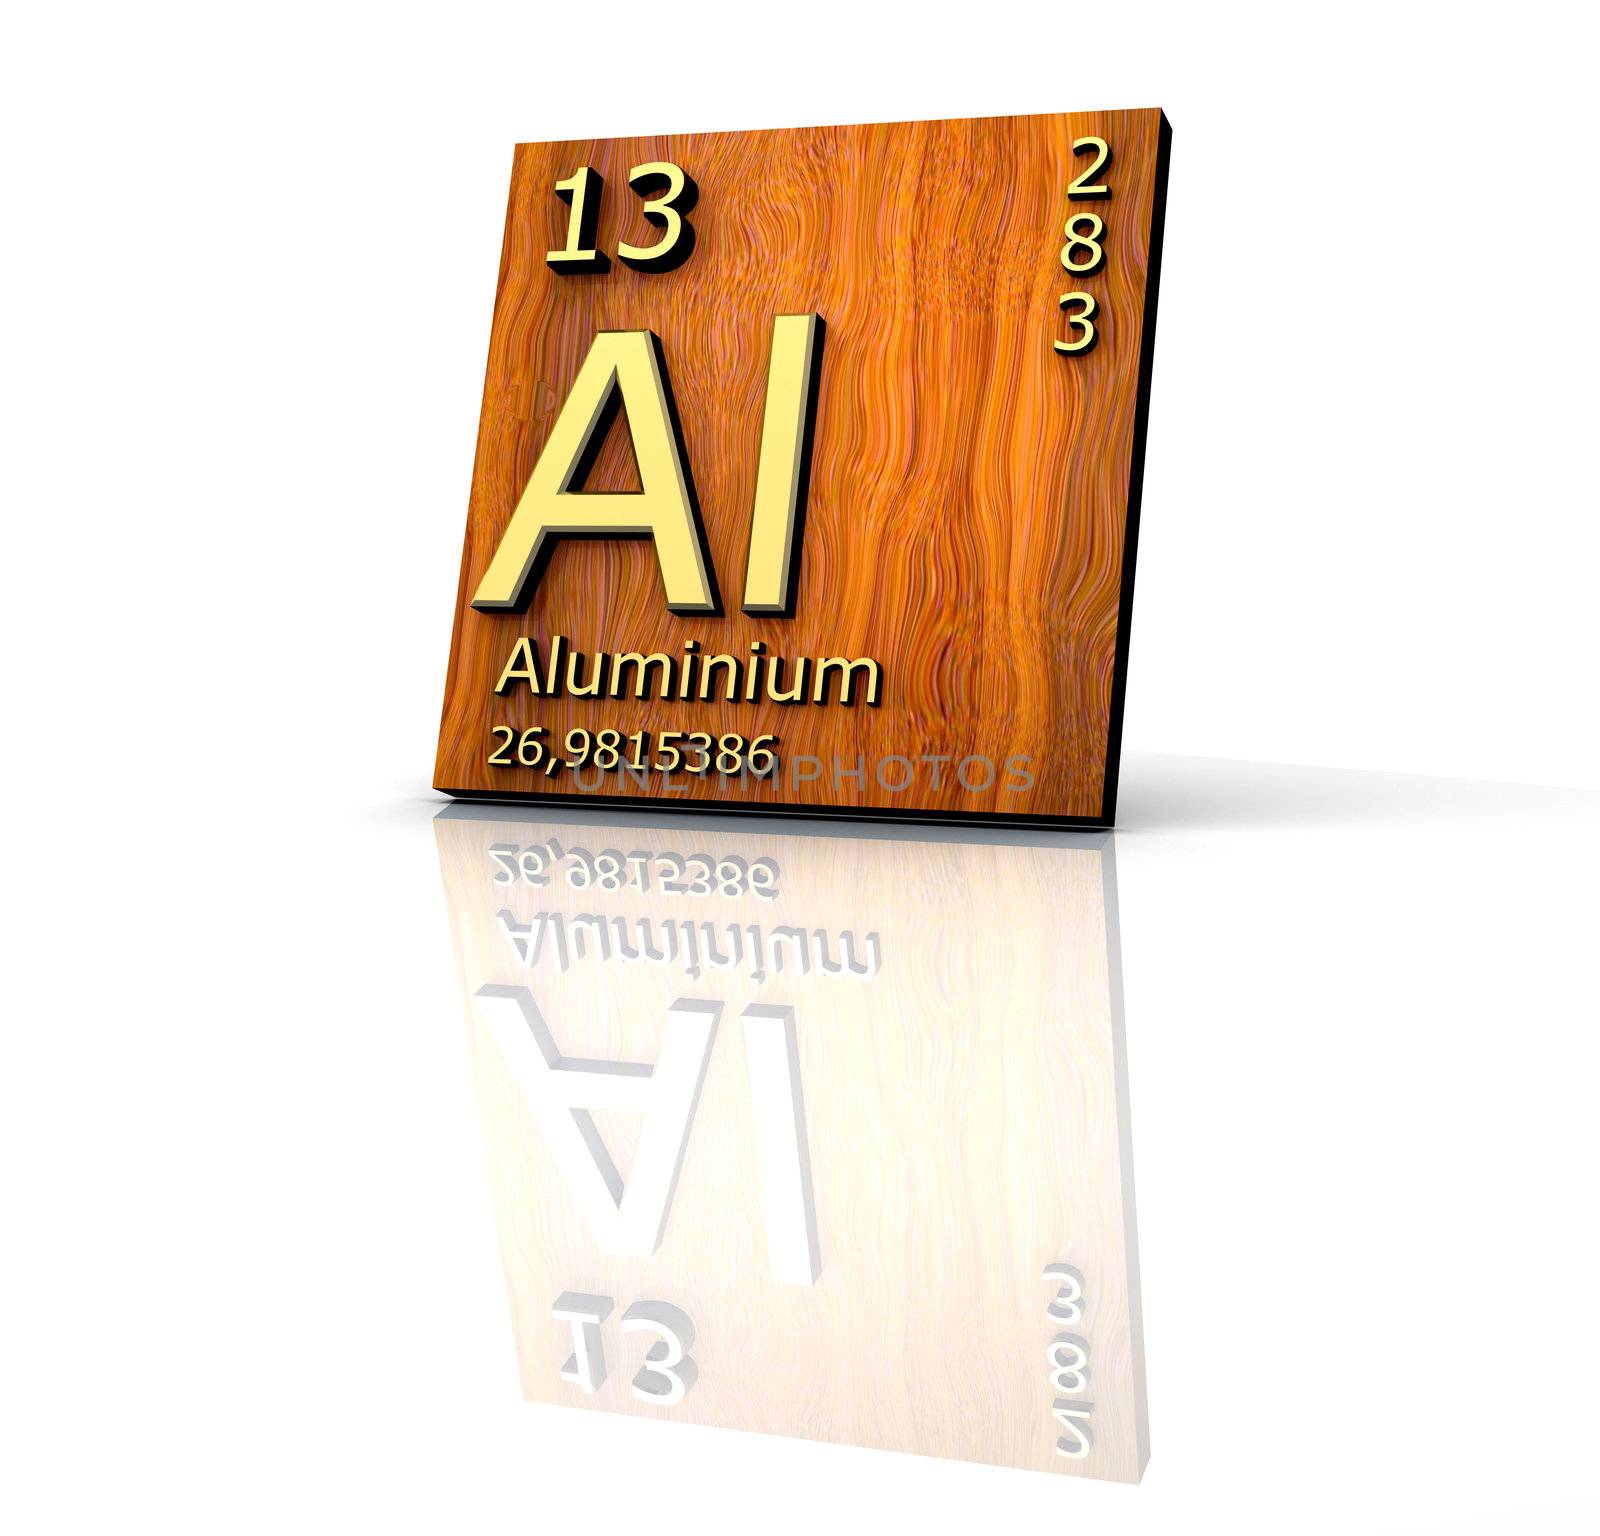 Aluminum form Periodic Table of Elements - wood board